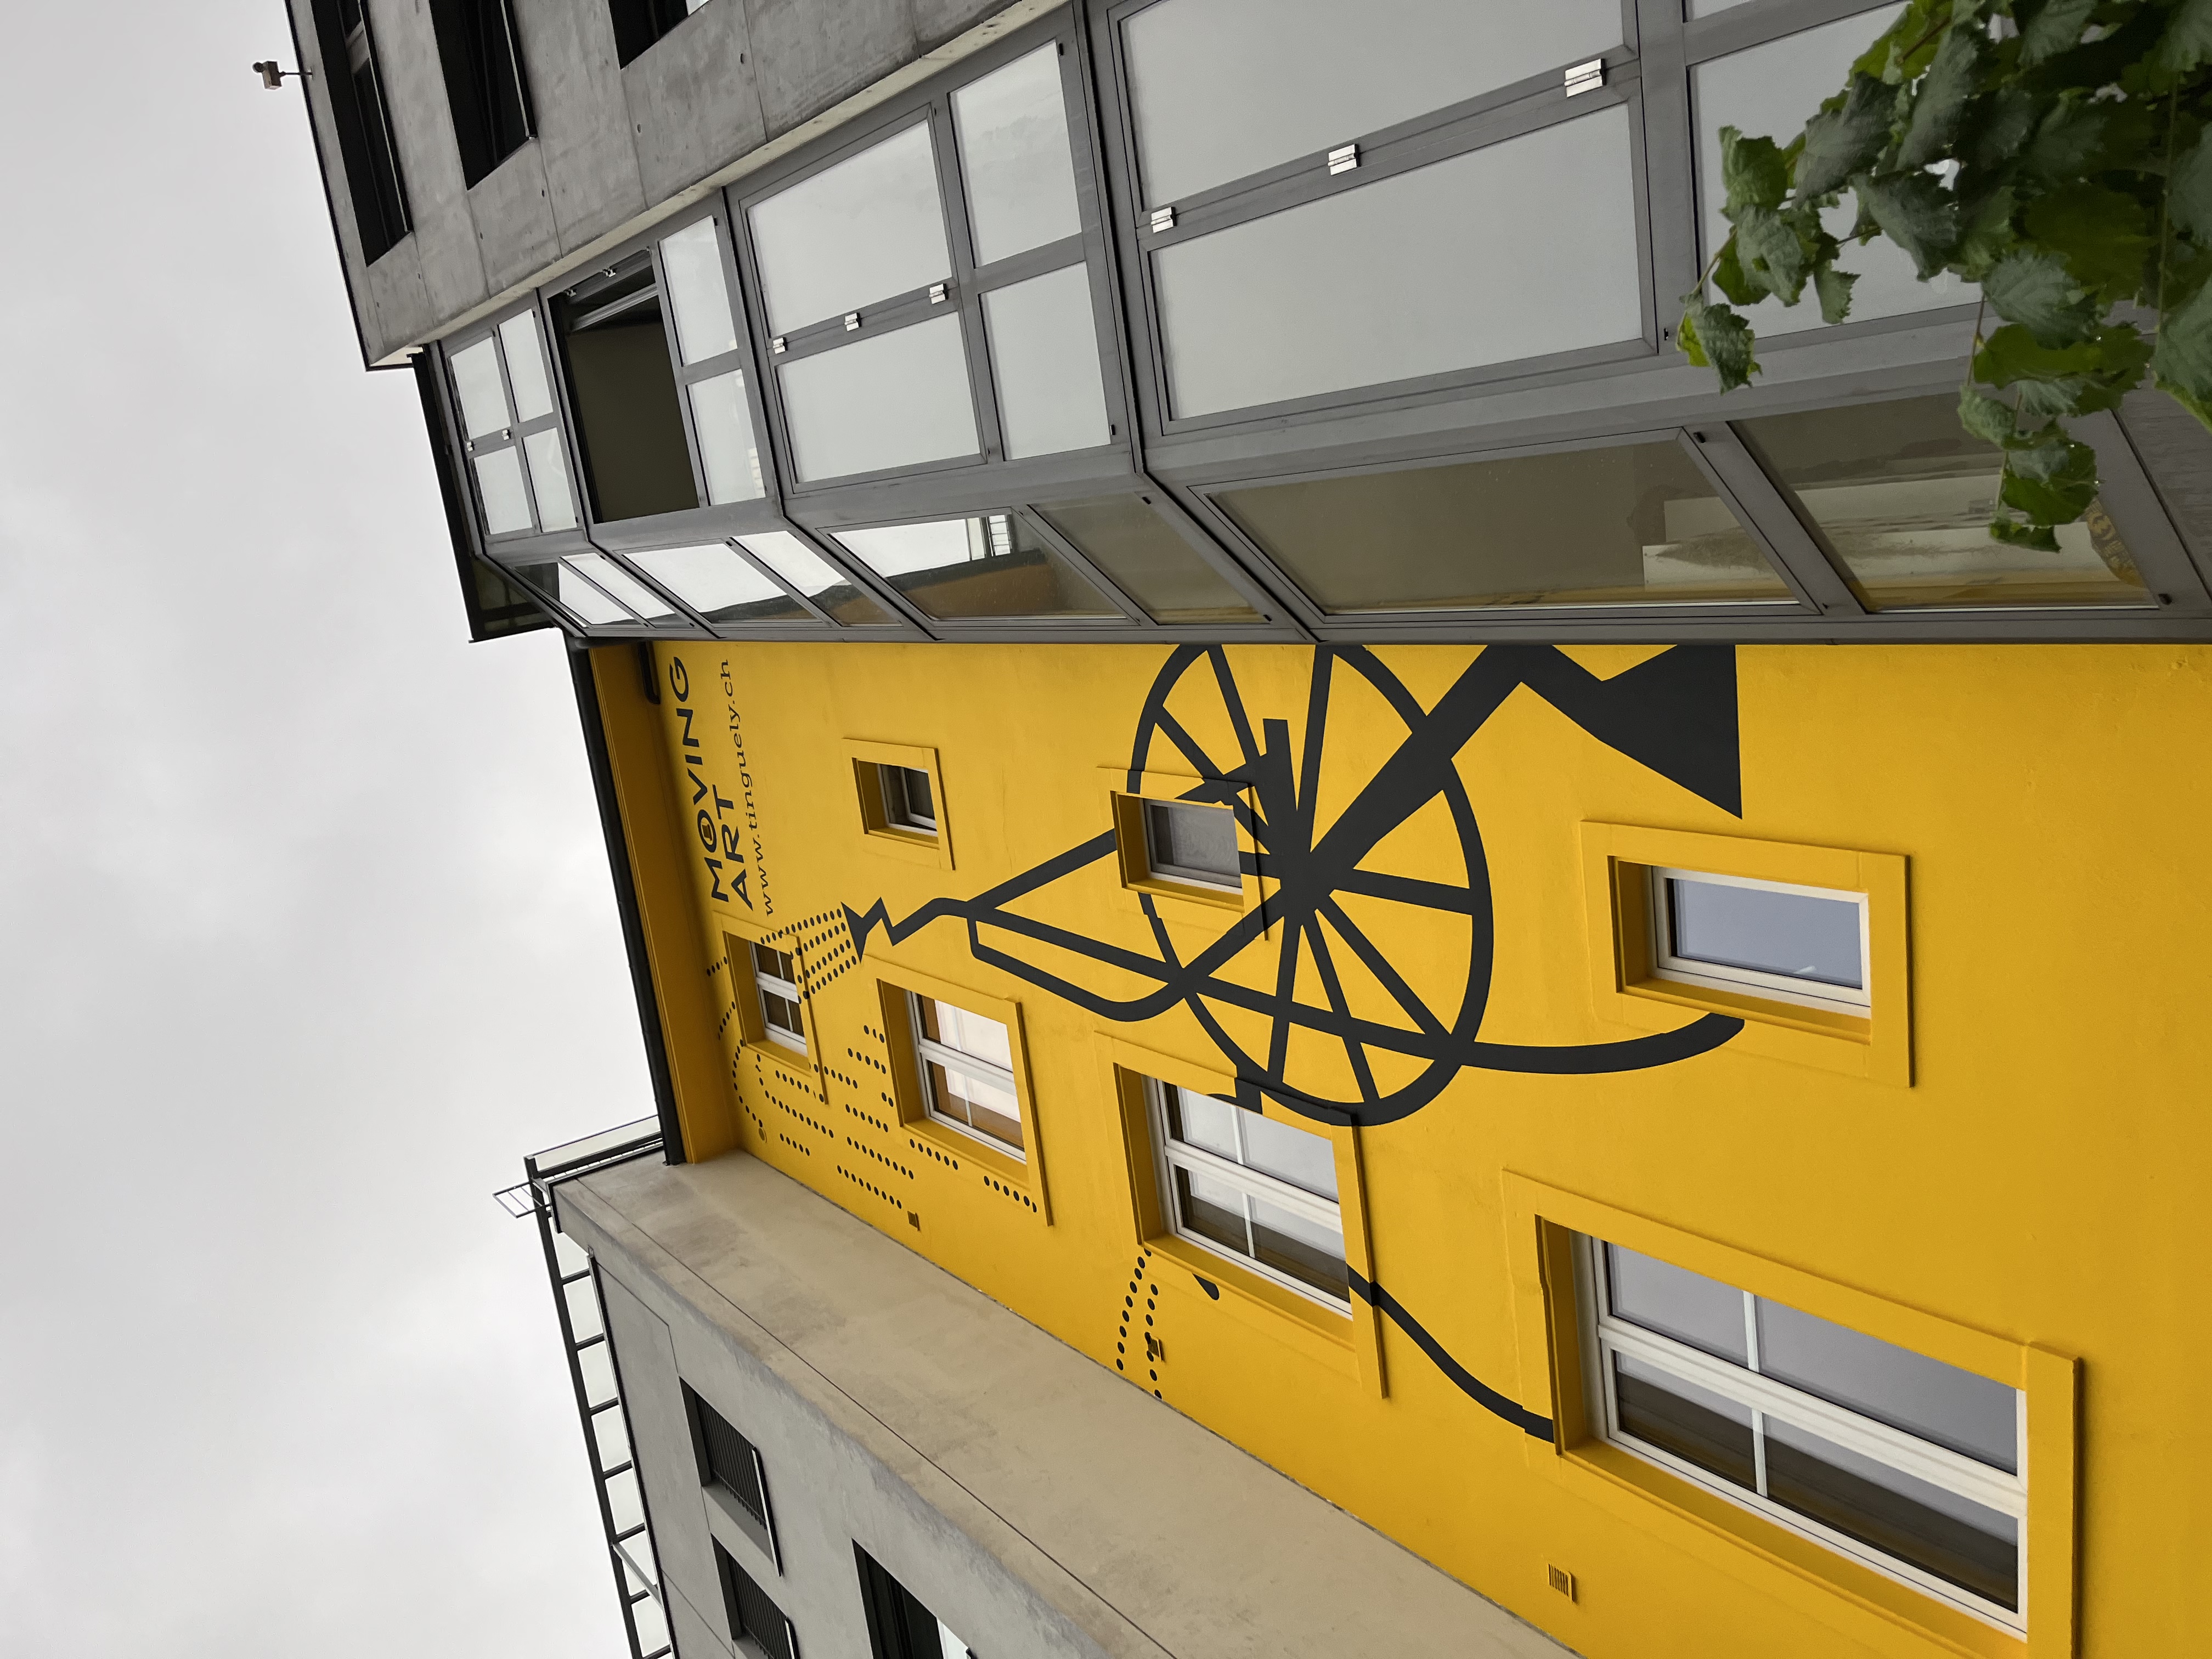 https://sarahweishaupt.ch/media/pages/home/illustration-fassade-fuer-museum-tinguely/f95a6fd702-1656364119/3627dabe-d8cf-46c8-b0ba-add298770446.jpeg